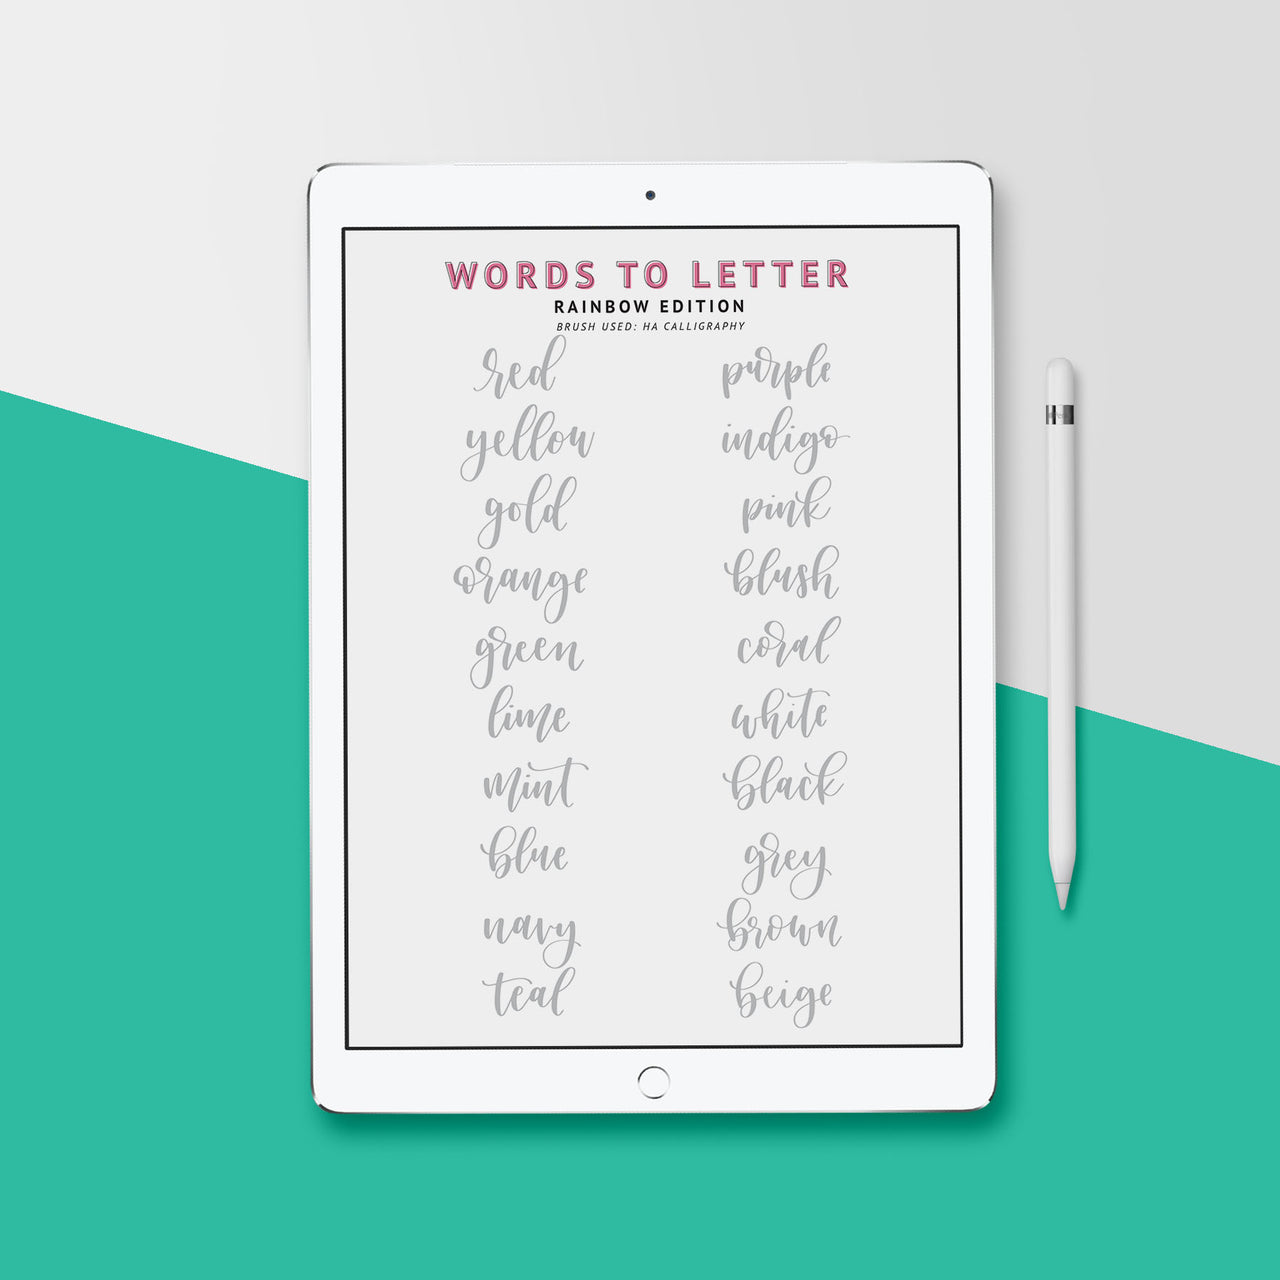 Lettering Practice Sheets, iPad Lettering, Words to Letter Rainbow Edition - Hewitt Avenue